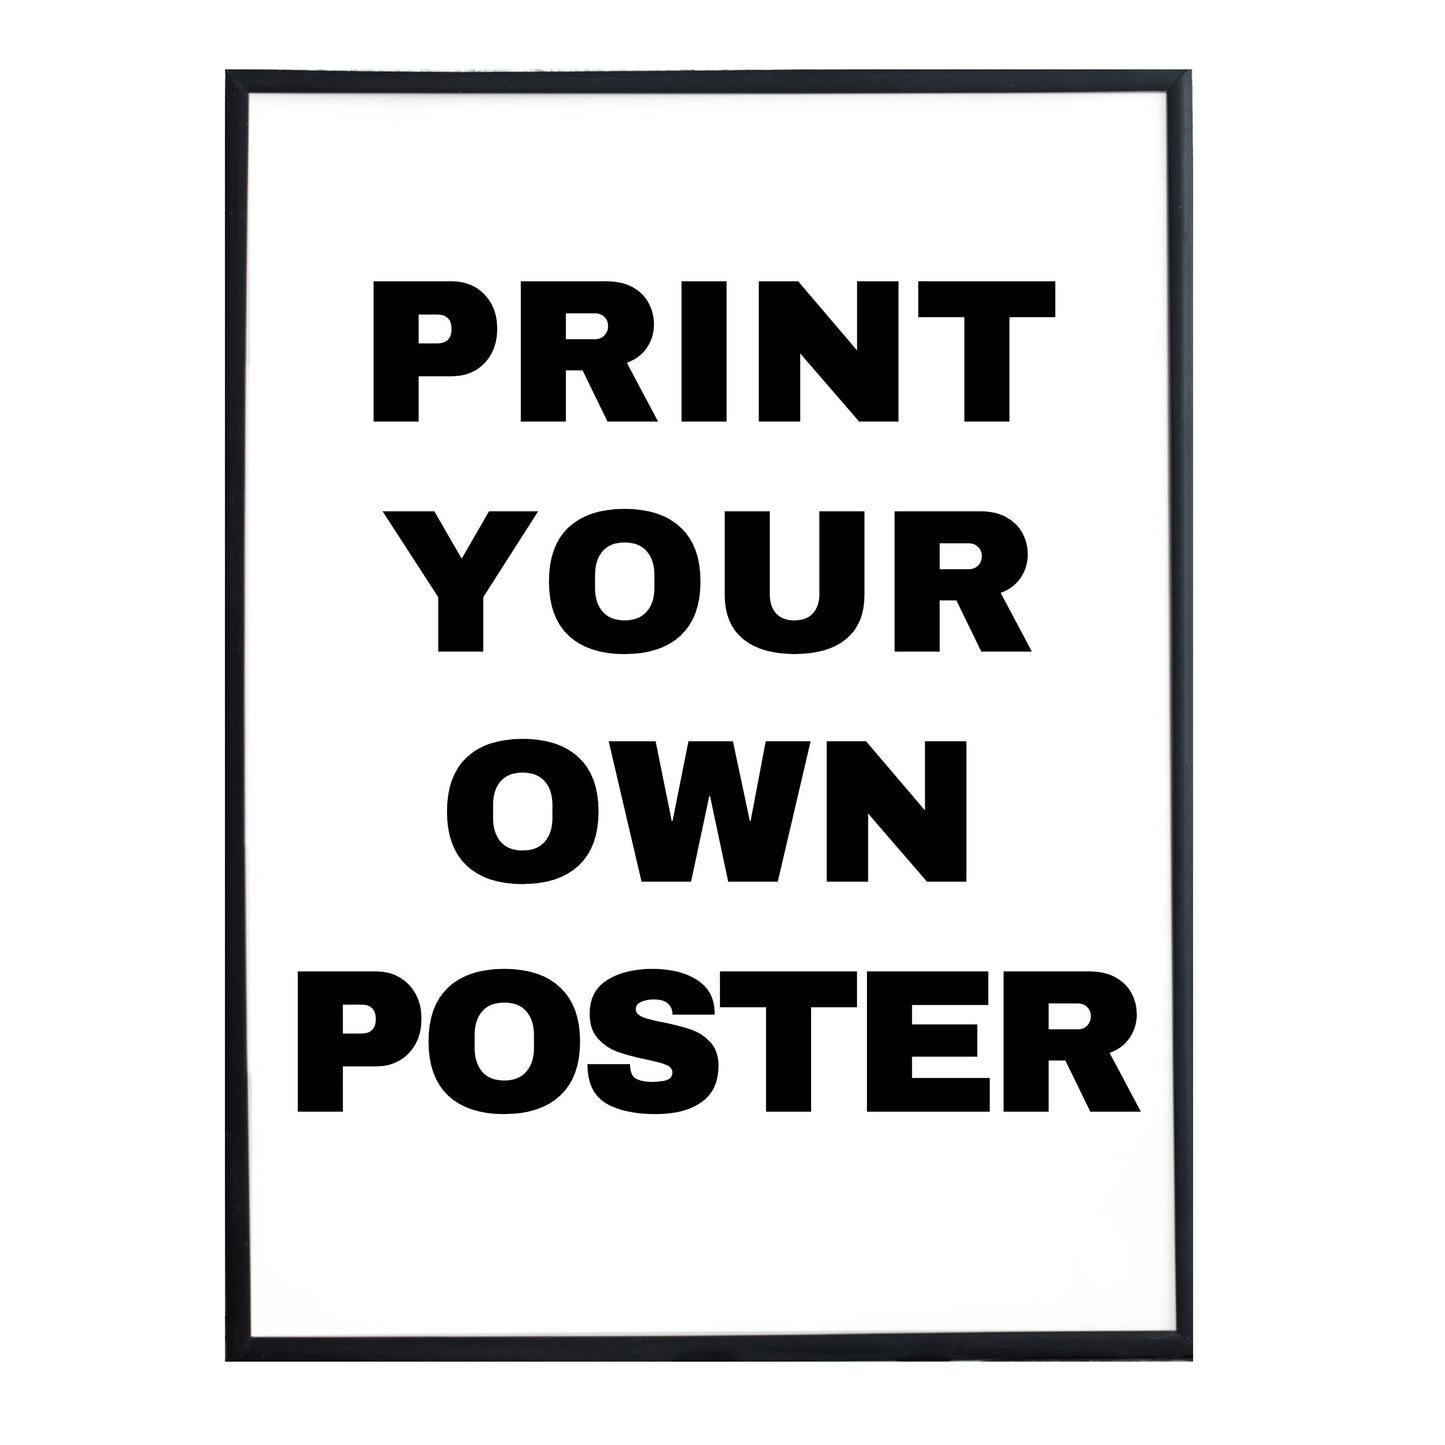 Custom Canvas, Poster, Puzzle, Framed Poster, Custom Printing Services, Fulfillment Services, Dropship Poster Printing, Printing Services.